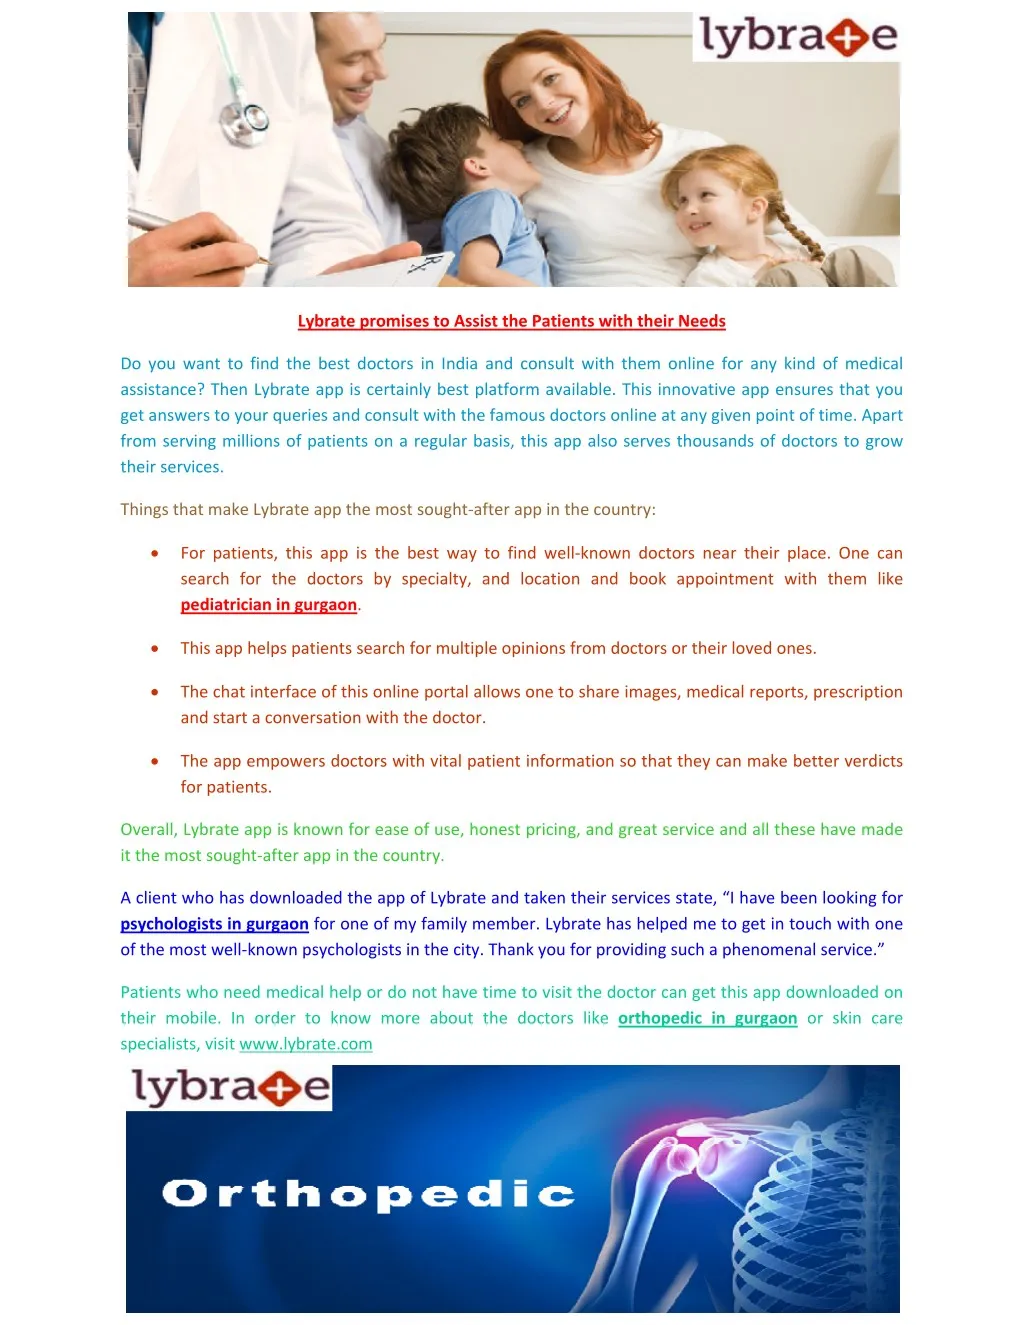 lybrate promises to assist the patients with